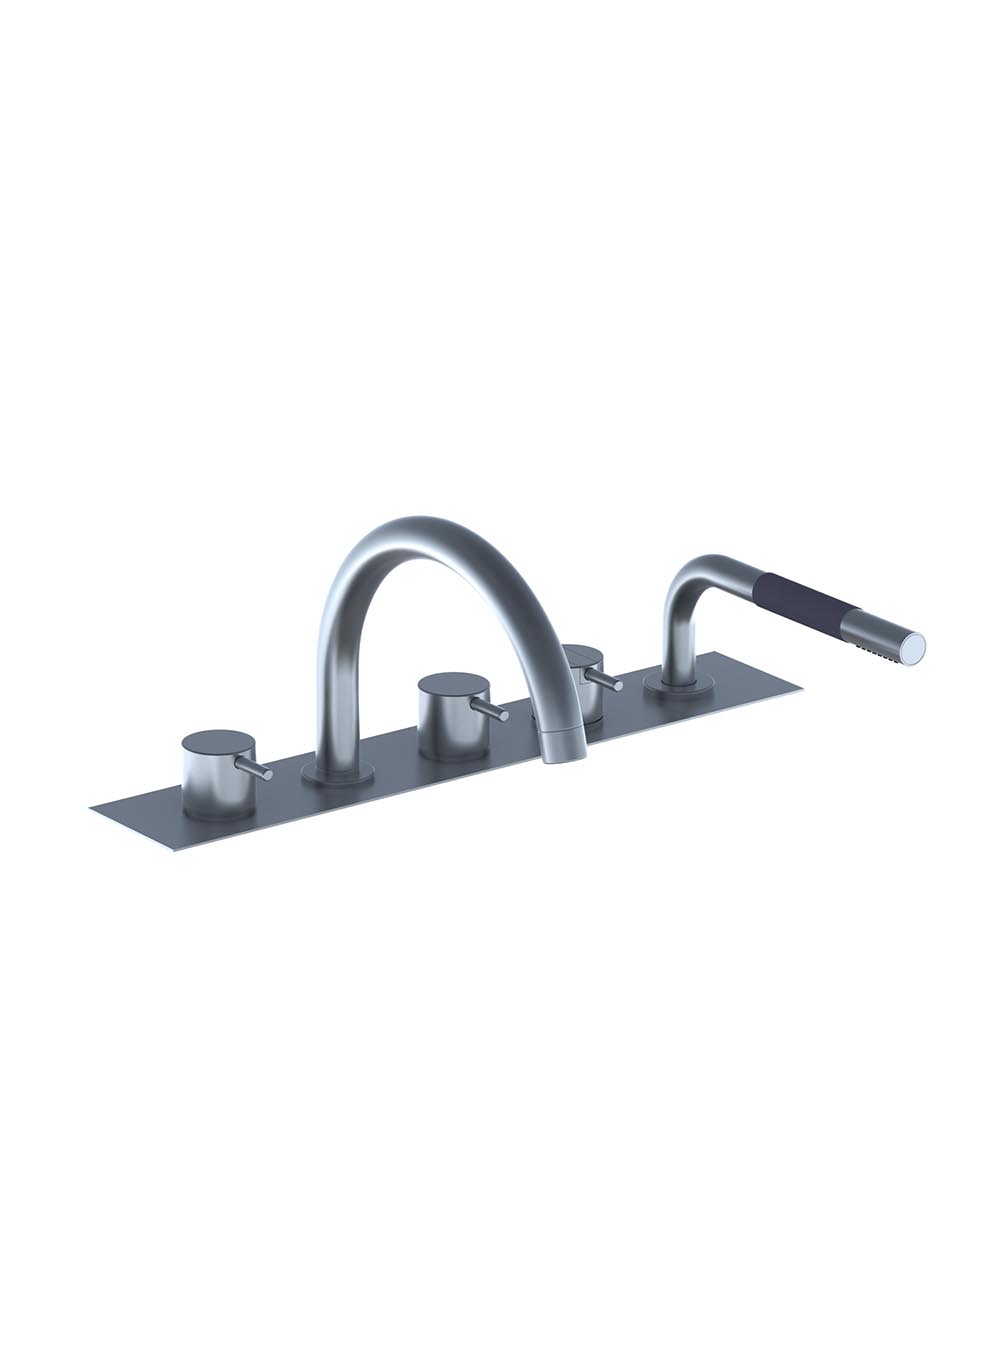 BK13: Two-handle mixer with swivel spout for bath filling and mixer with hand shower. Complete with mou...